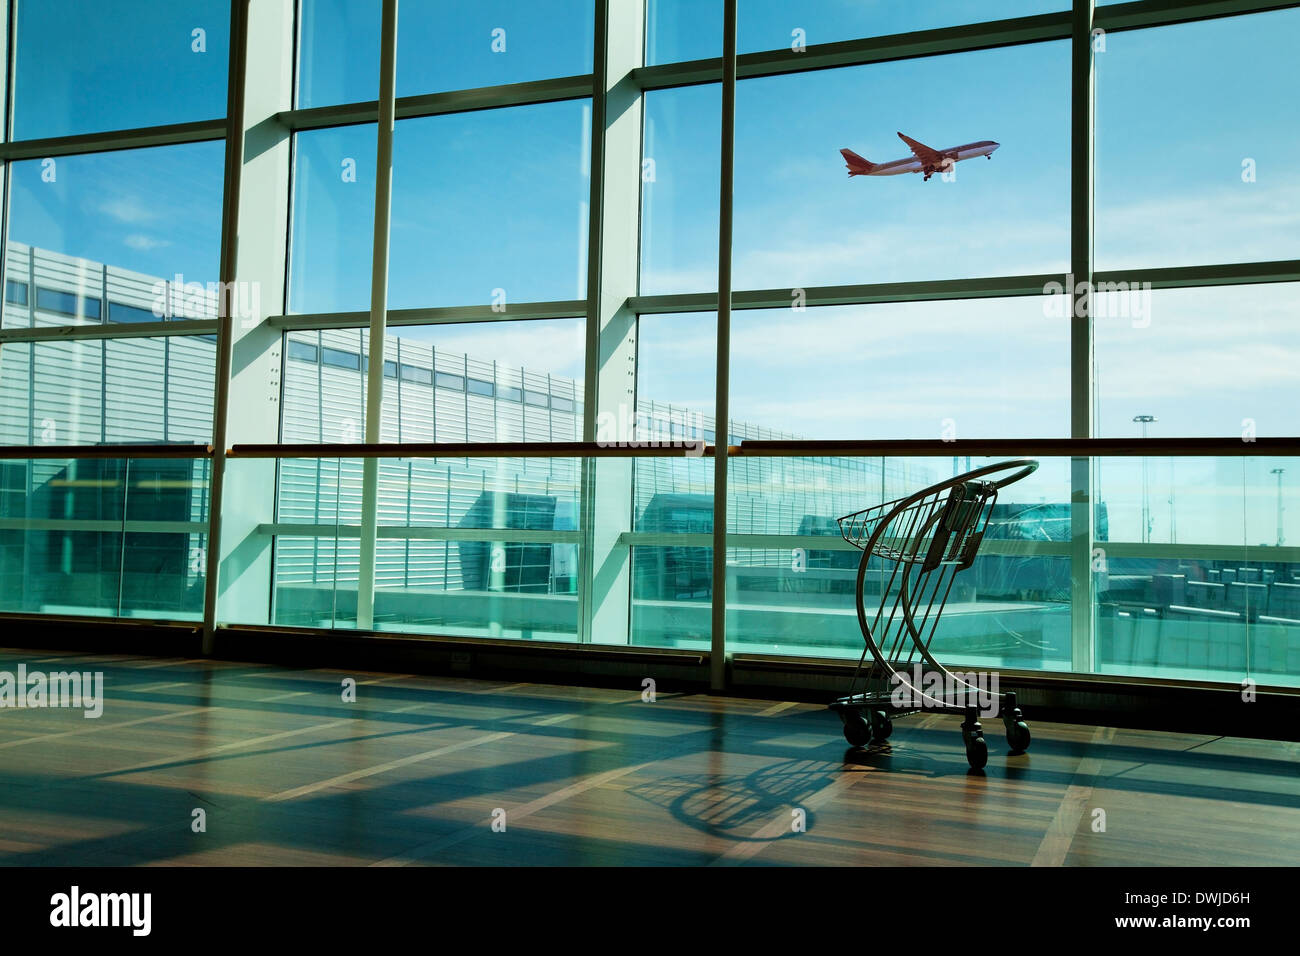 luggage cart in airport interior Stock Photo